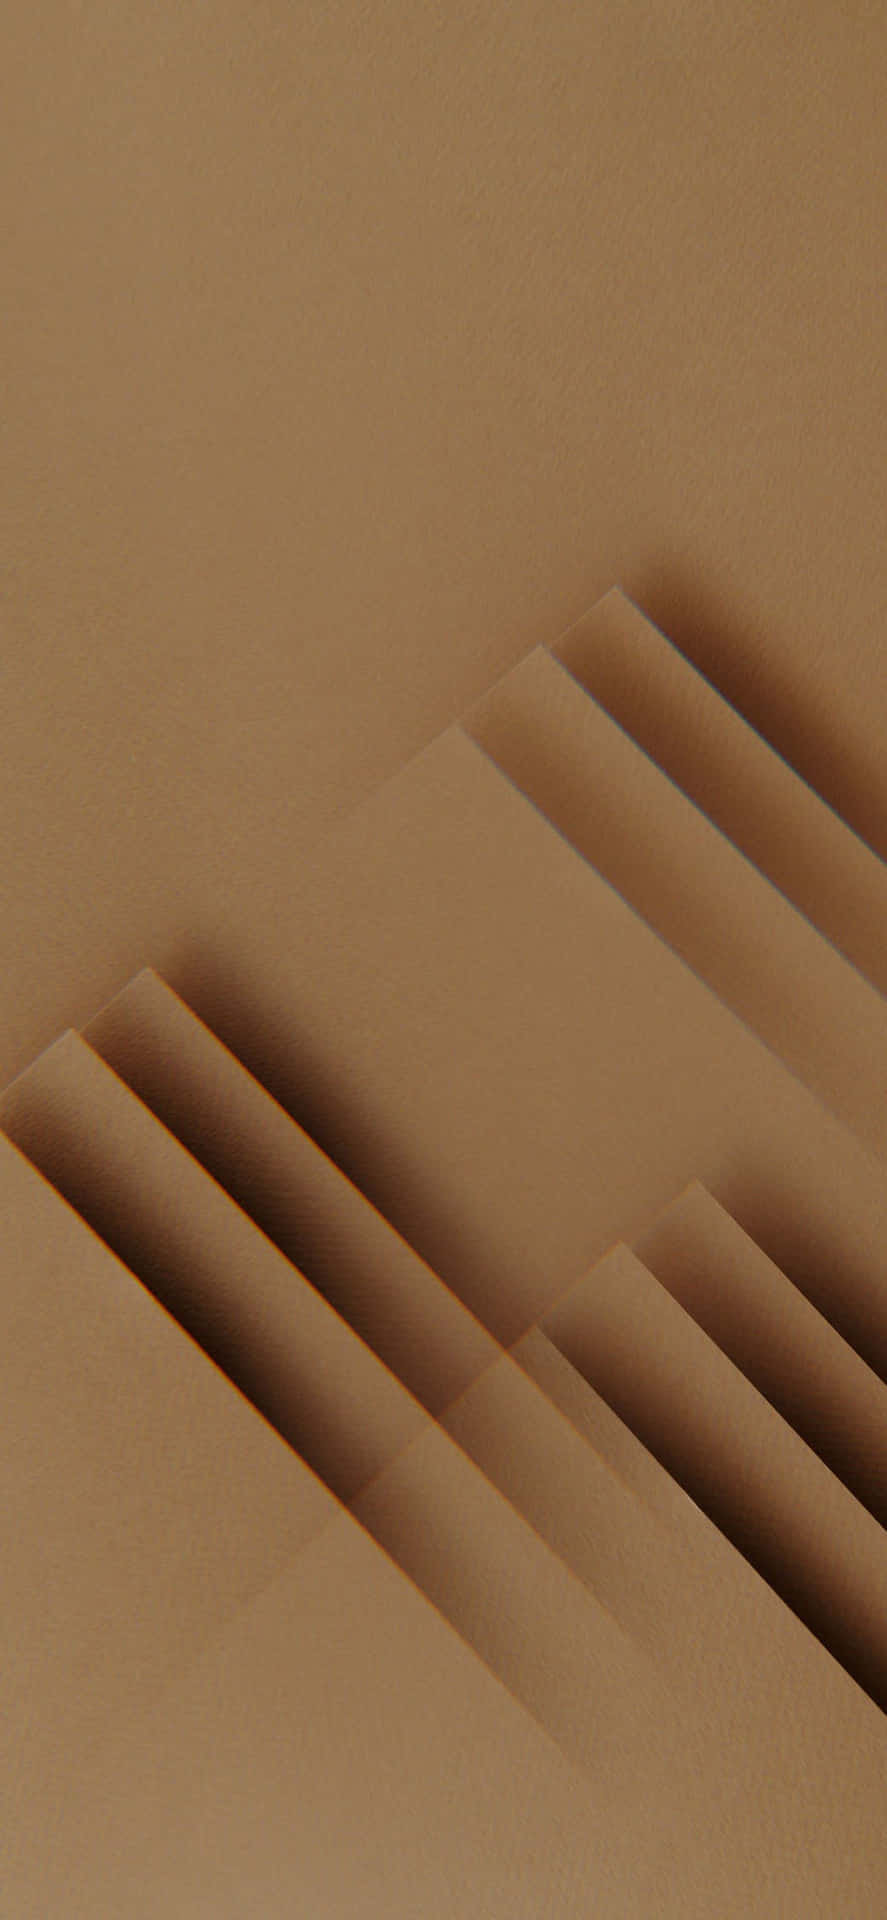 Abstract Minimalist Brown Aesthetic Wallpaper